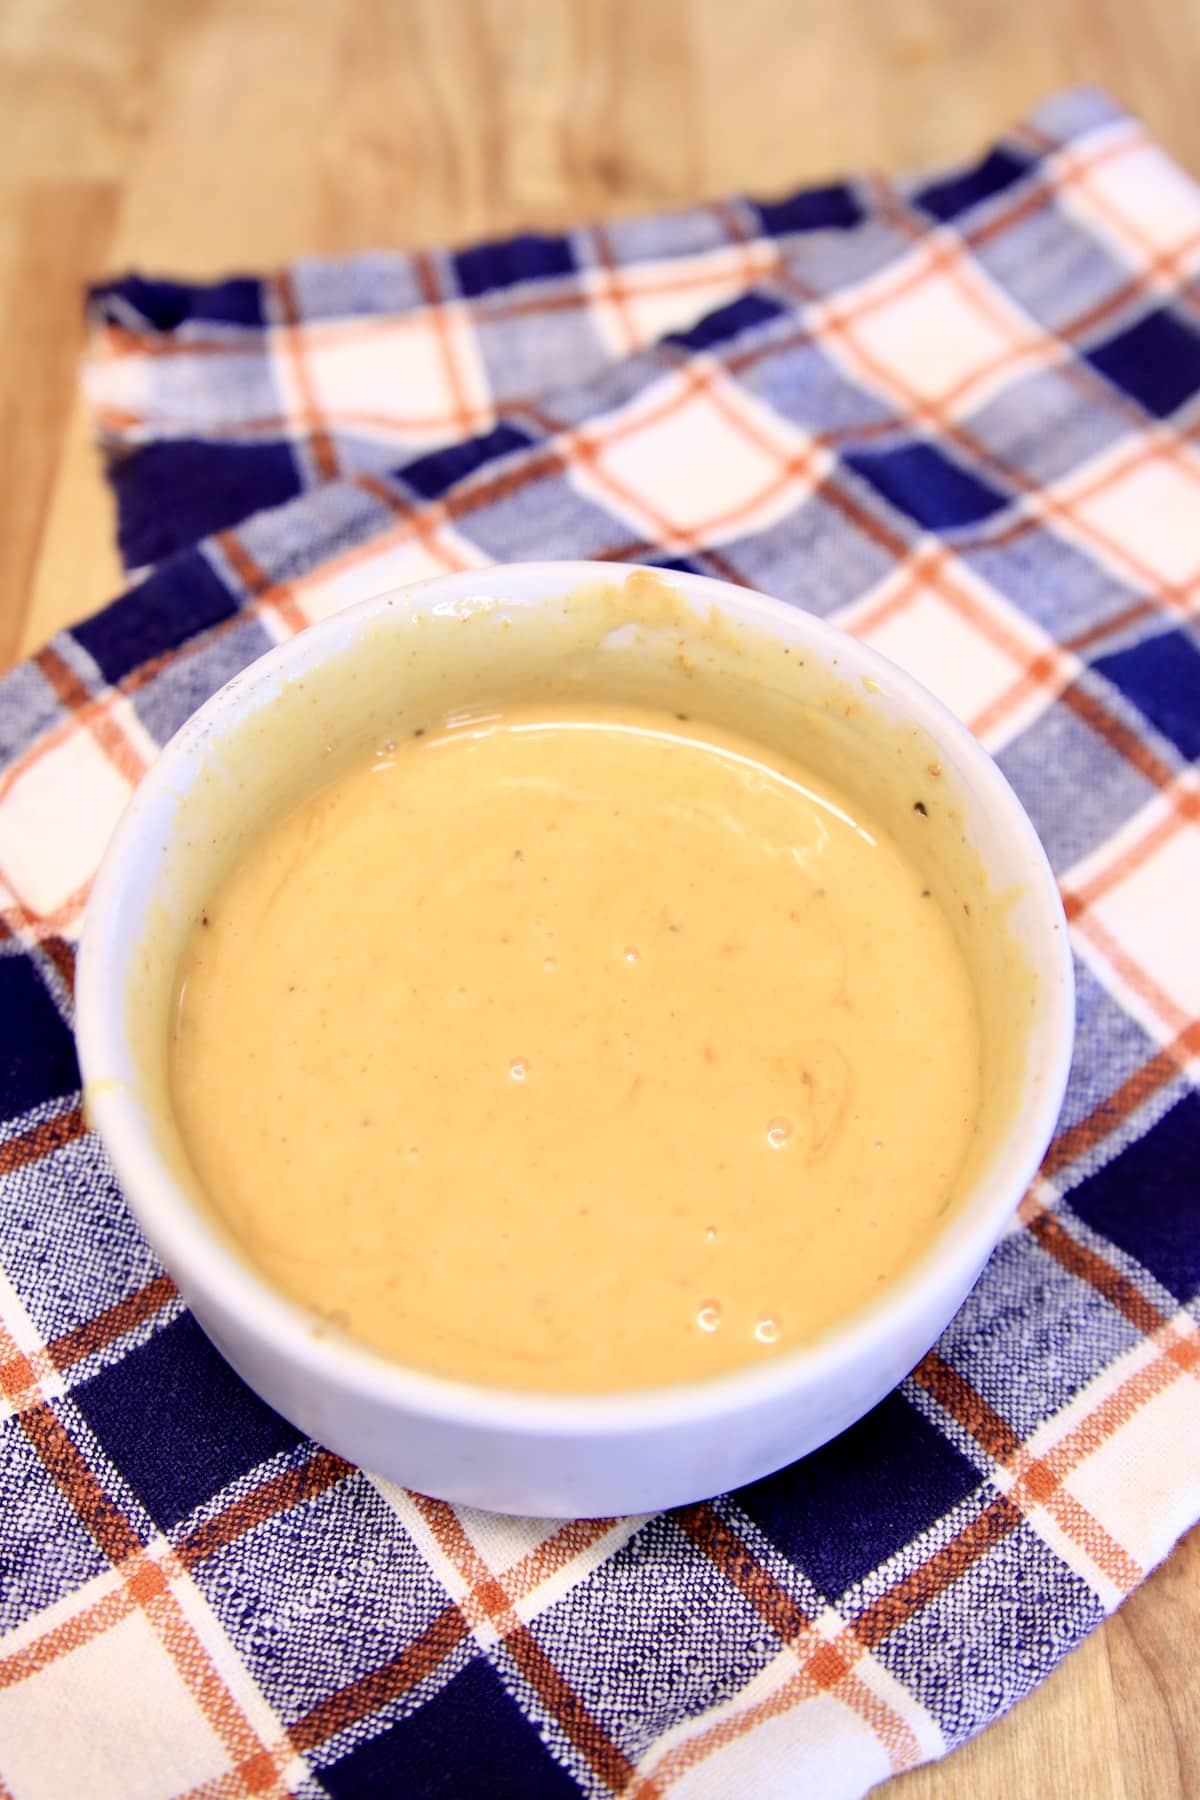 Bowl of dipping sauce on a plaid napkin.